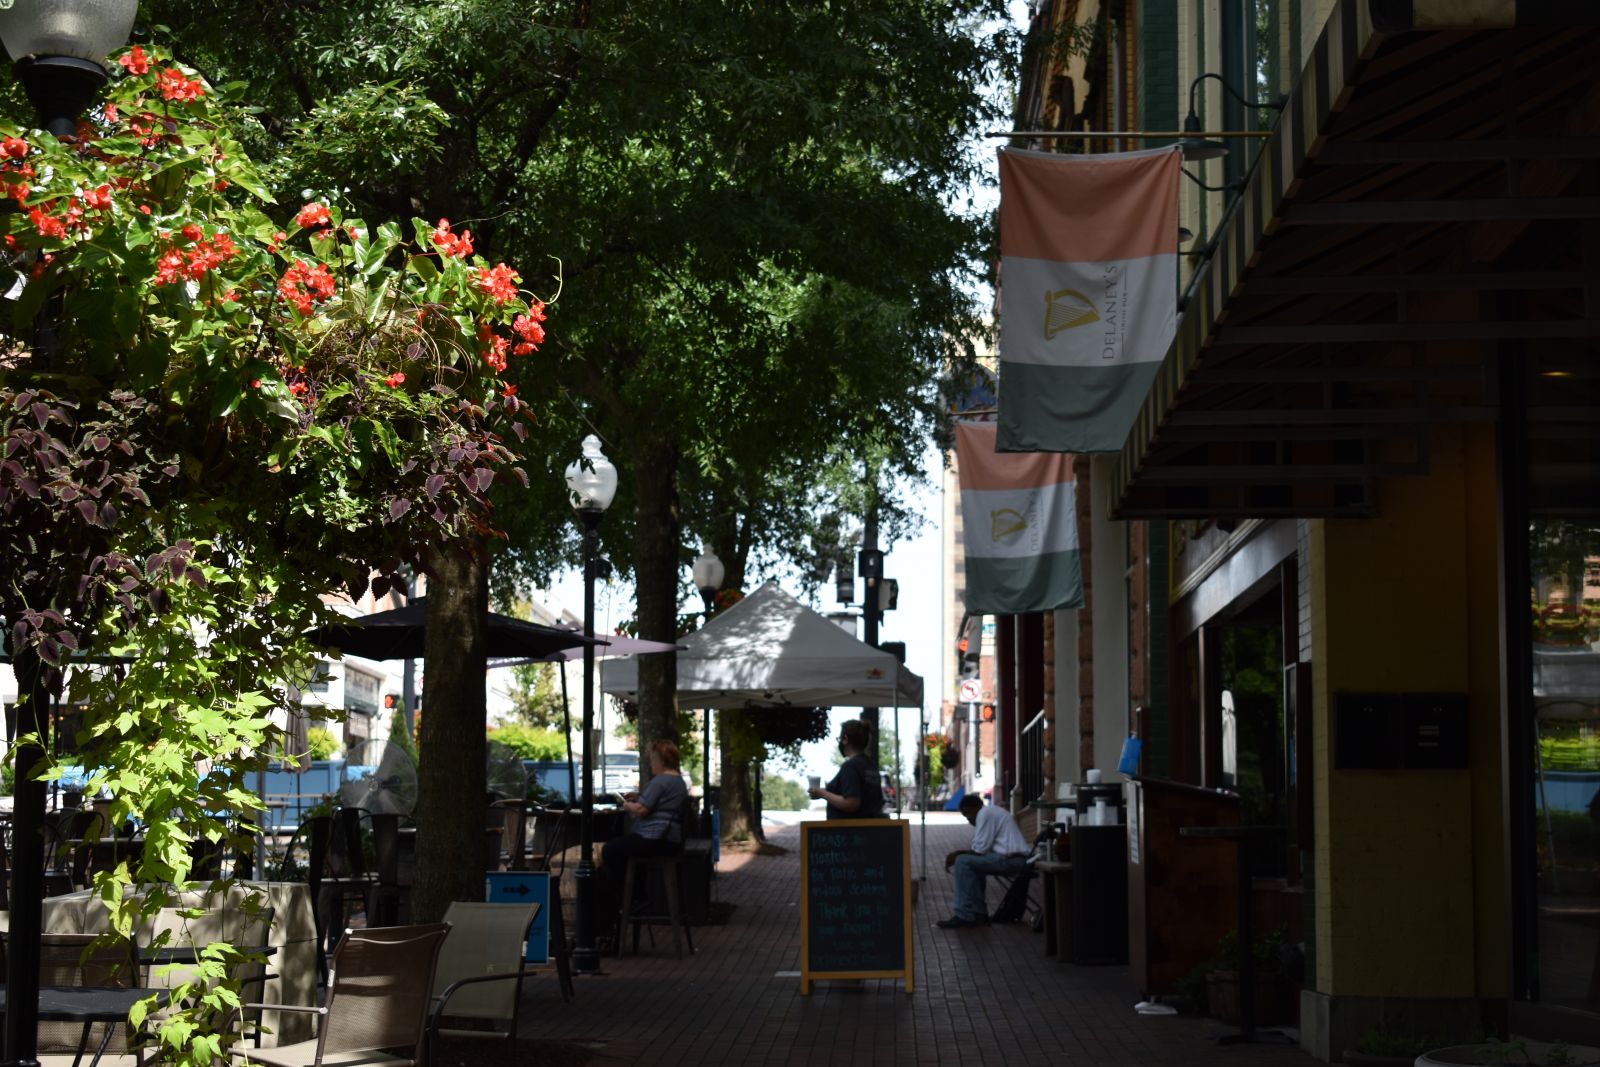 Spartanburg saw a year-over-year uptick in visitors to Morgan Square in May after the city barricaded the area for pedestrian traffic and outdoor seating for restaurants. (Photo/Molly Hulsey)